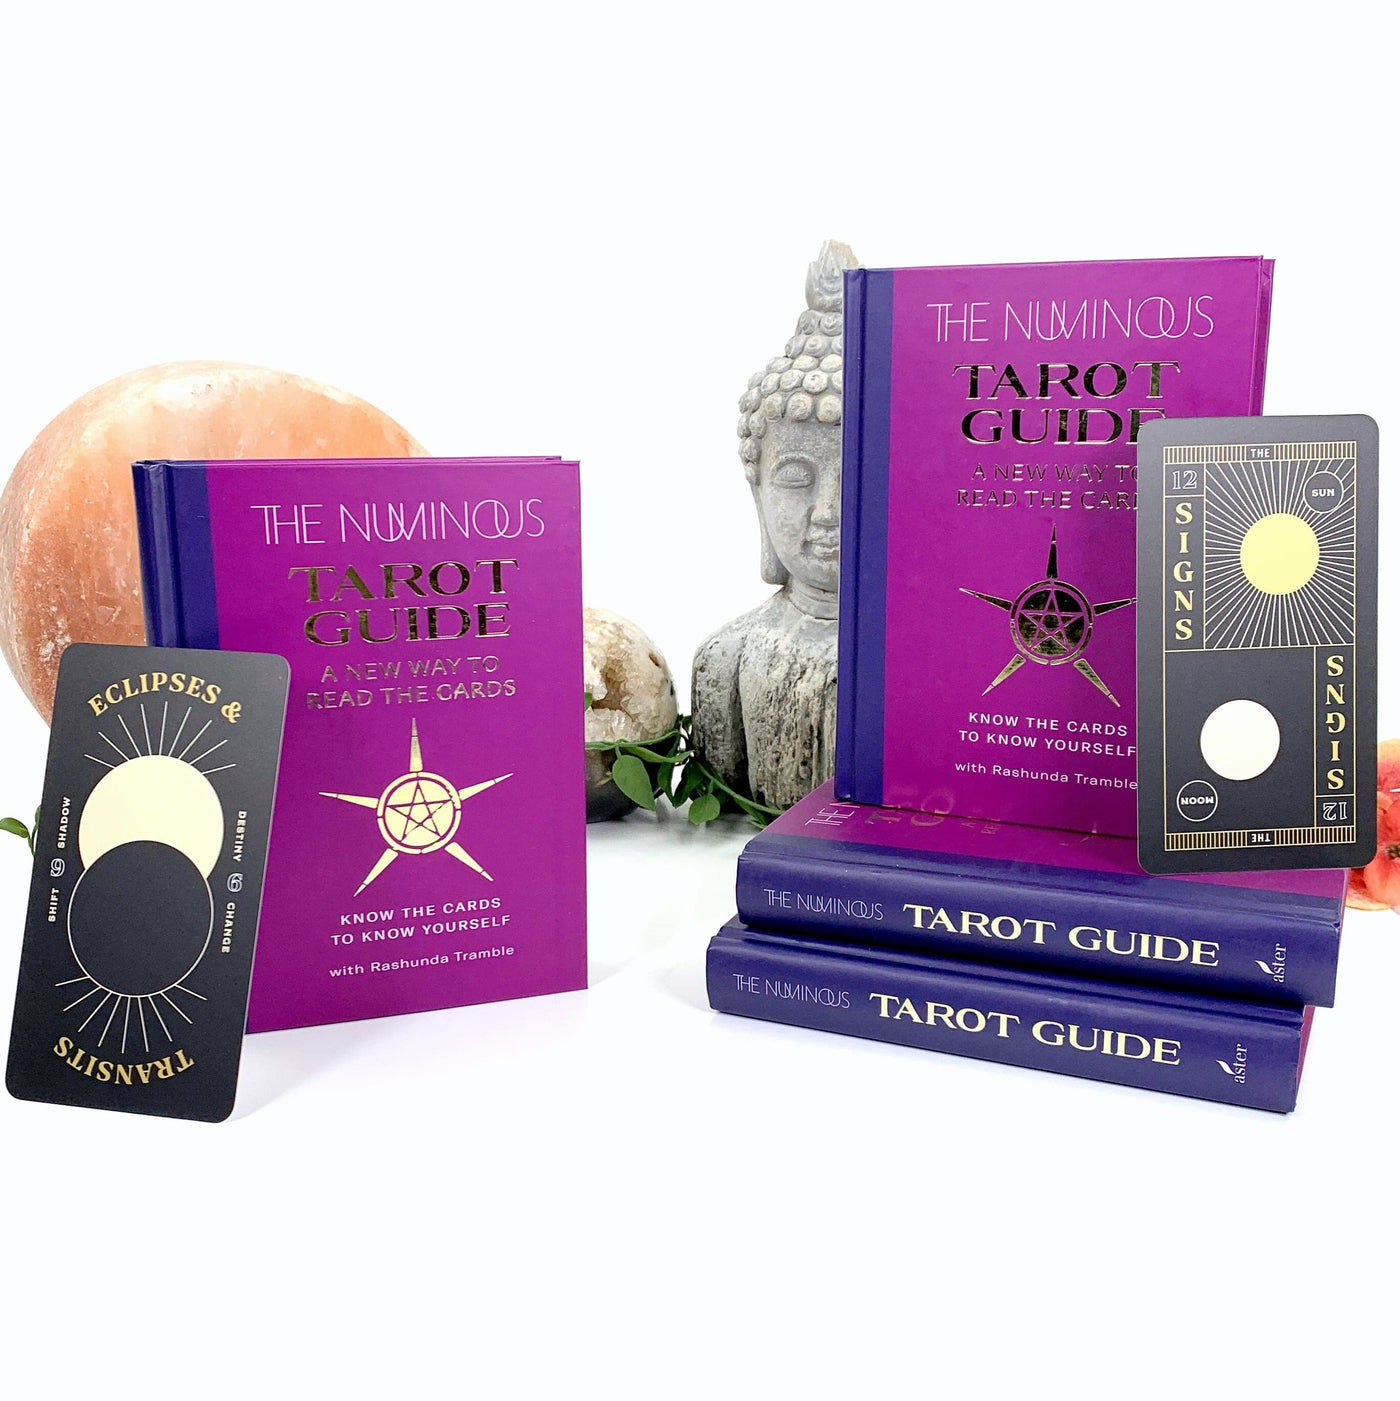 Learn the language of the Tarot and discover how to read any deck, no matter the genre or style of imagery with the Book The Numinous Tarot Guide by Rashunda Tramble 